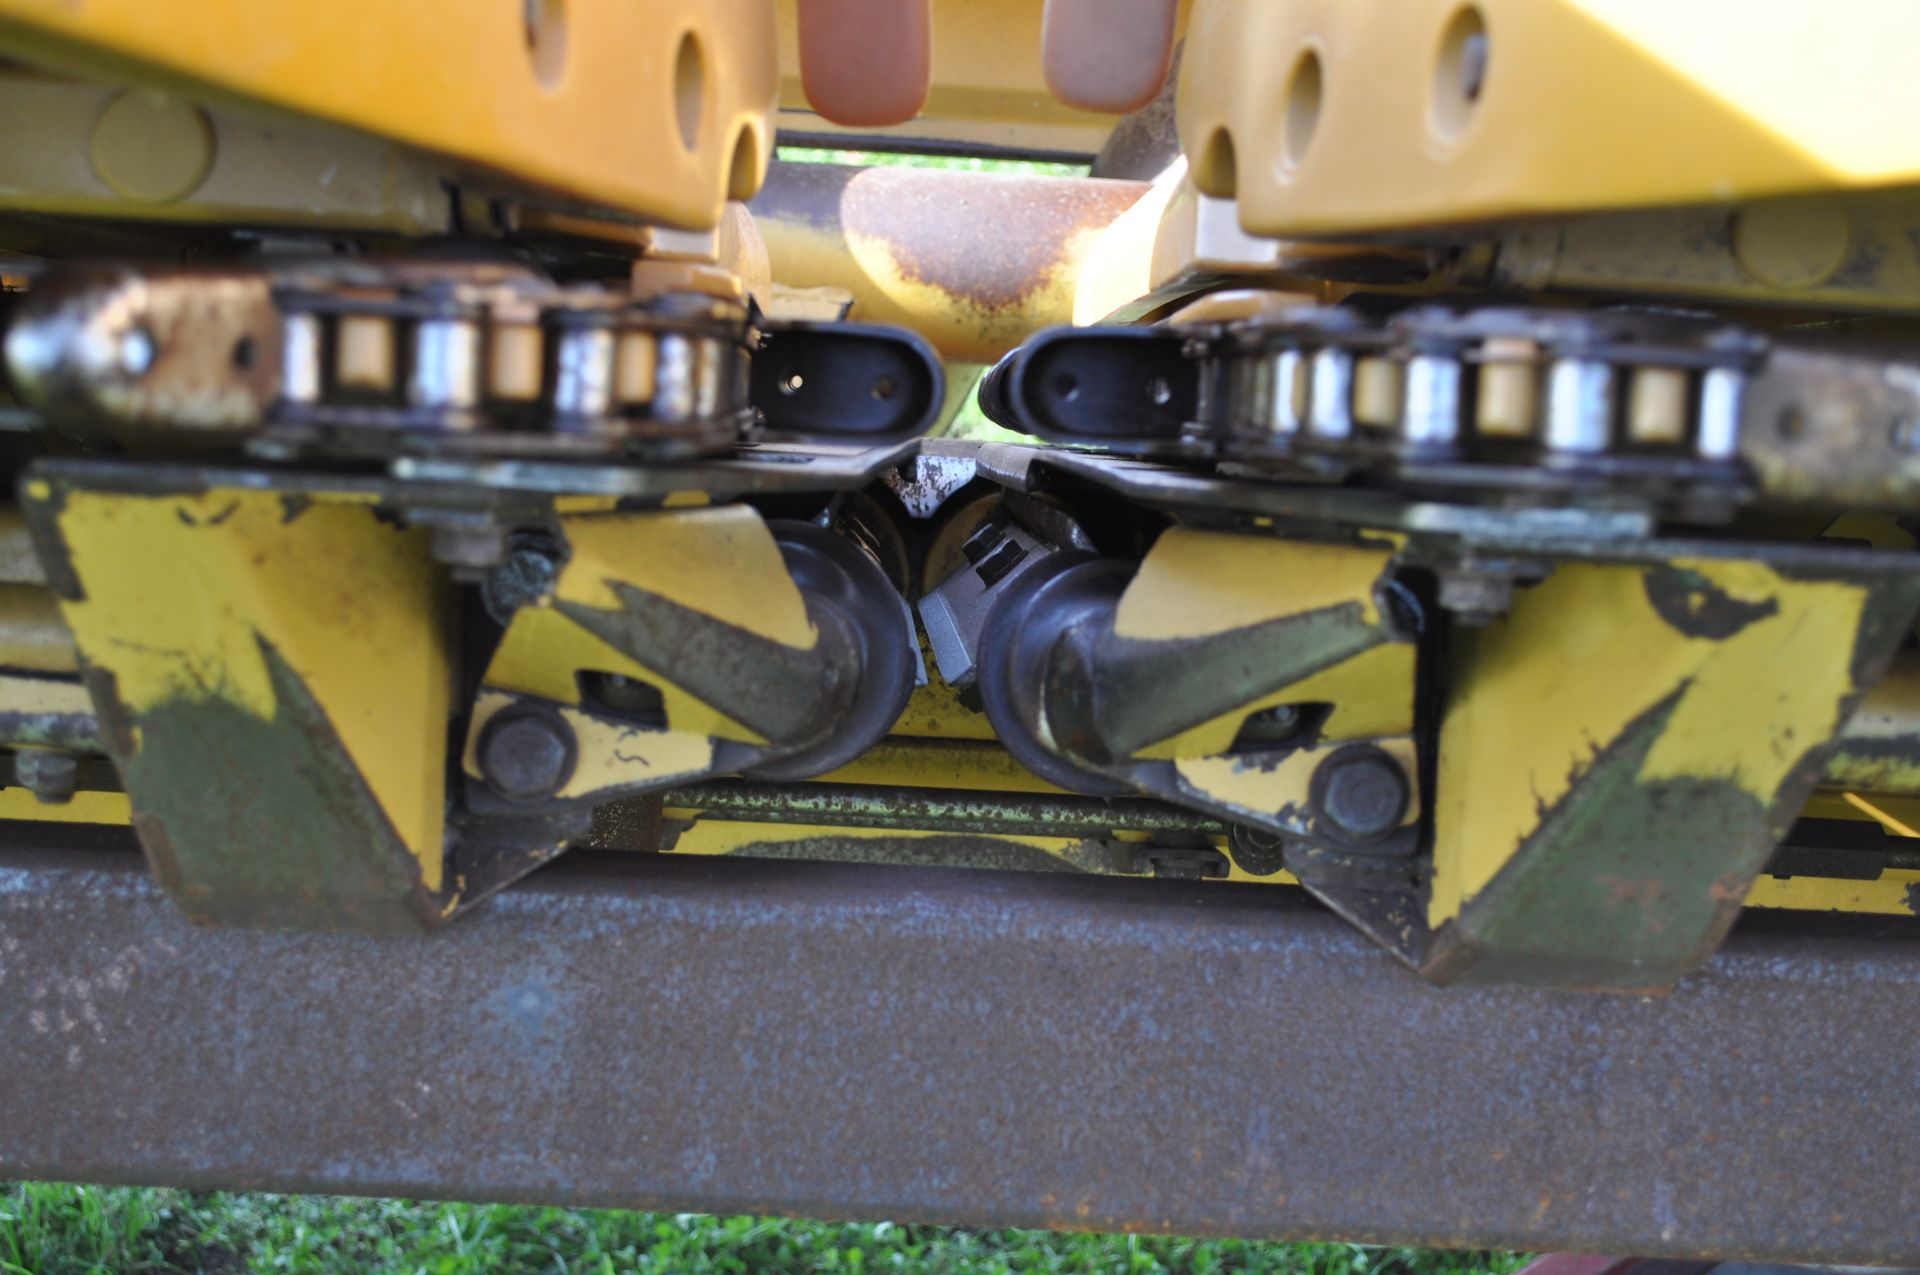 Lexion Model C508 corn head, 30”/8-row, hyd deck plates, poly snouts - Image 22 of 33